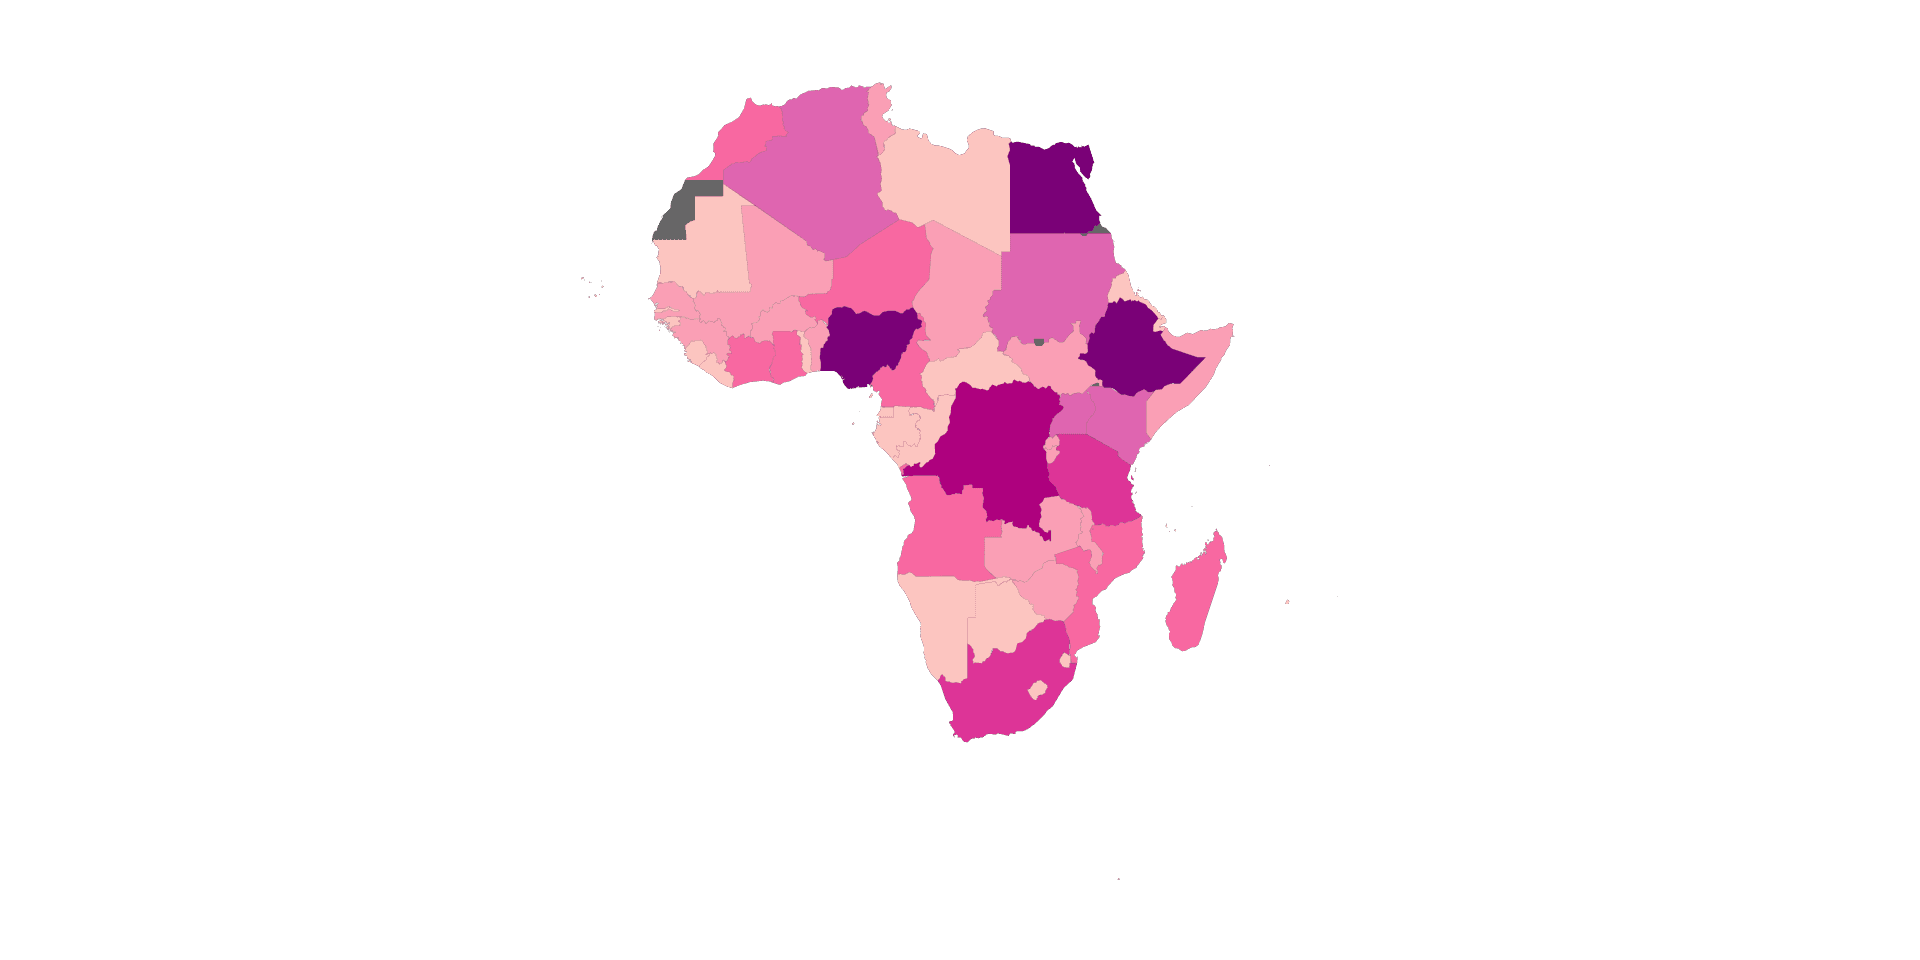 Africa Country Demographic Map 2021